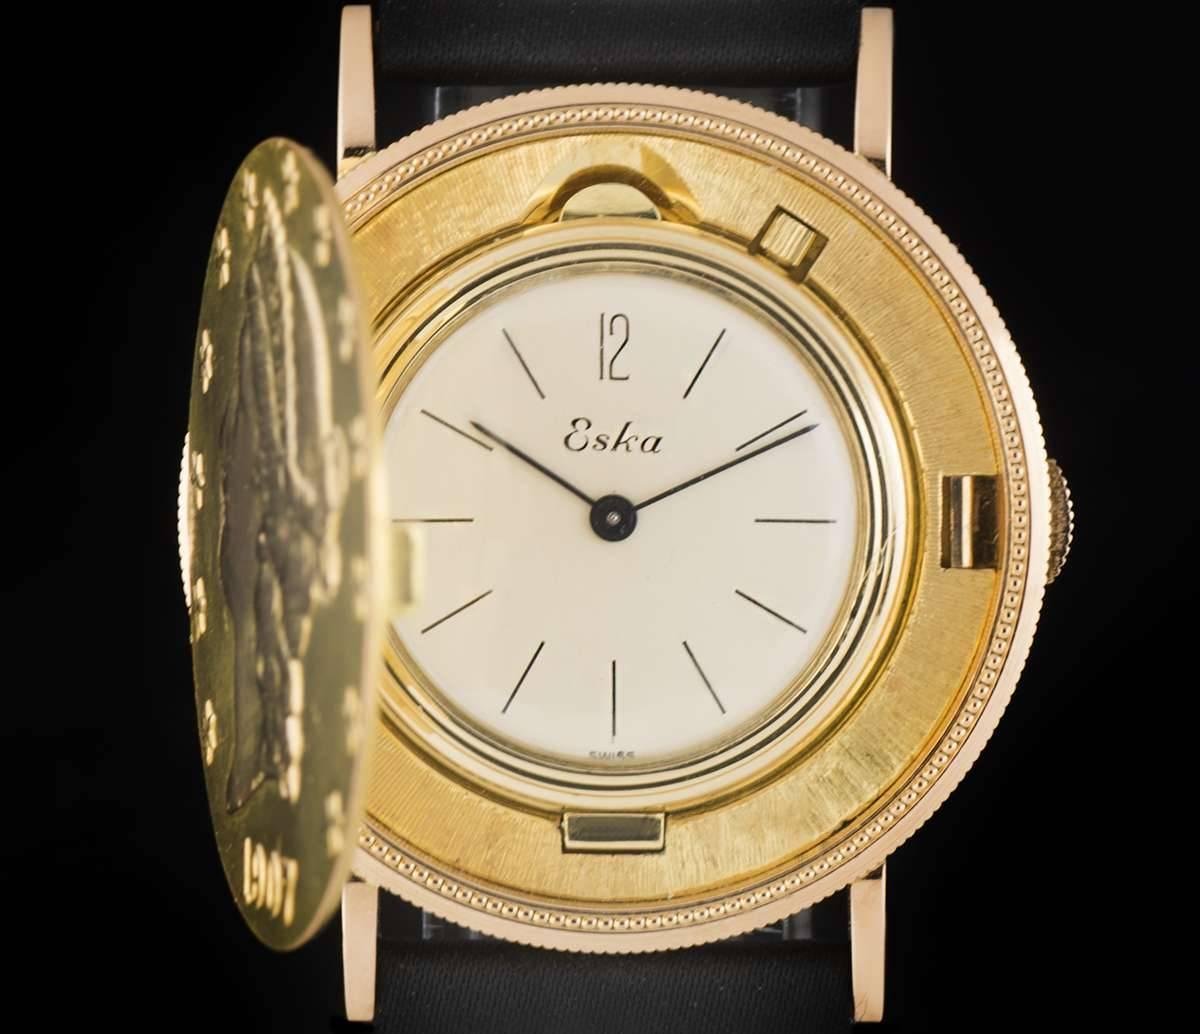 A Gold 20 Dollar Coin Gents Wristwatch, the gold 20 dollar outer case - the front of the coin is engraved with the Liberty Head and the date "1907", silver dial with hour markers, a fixed gold bezel, plastic glass, the caseback is the